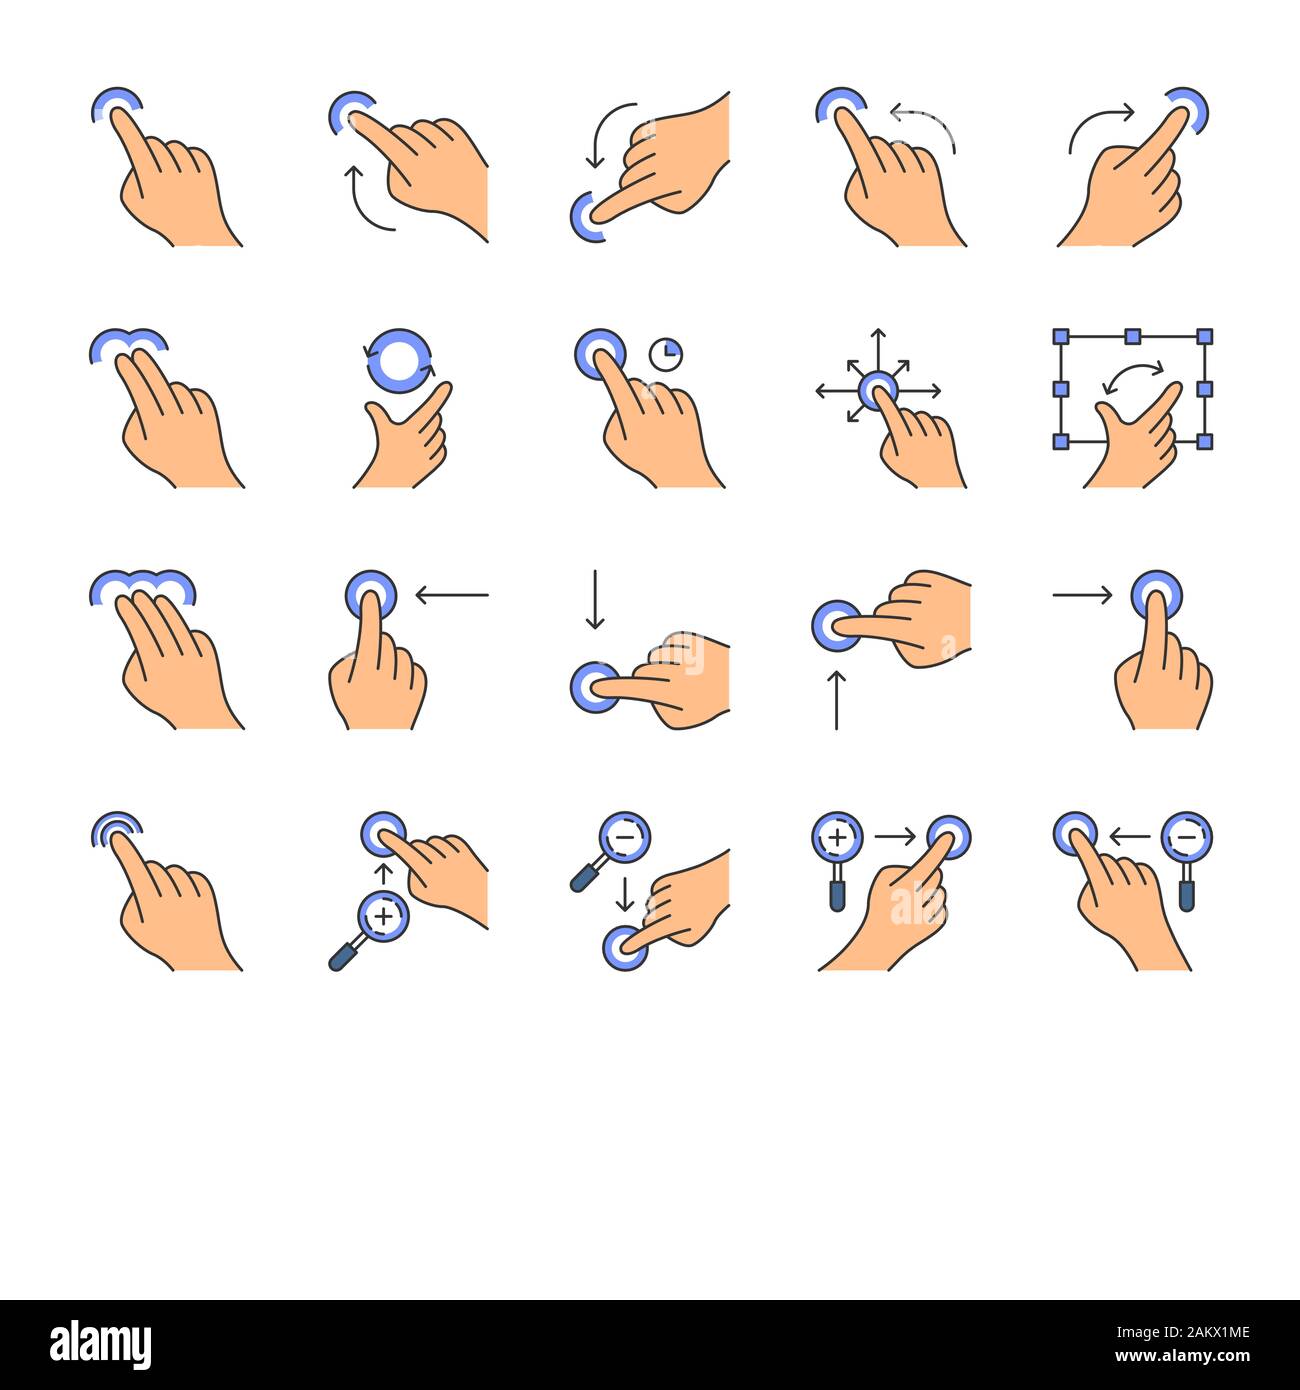 Touchscreen gestures color icons set. Tap, point, 2x tap, 3x click gesturing. Flick, zoom gesture. Vertical, horizontal scroll up, down. Drag finger a Stock Vector